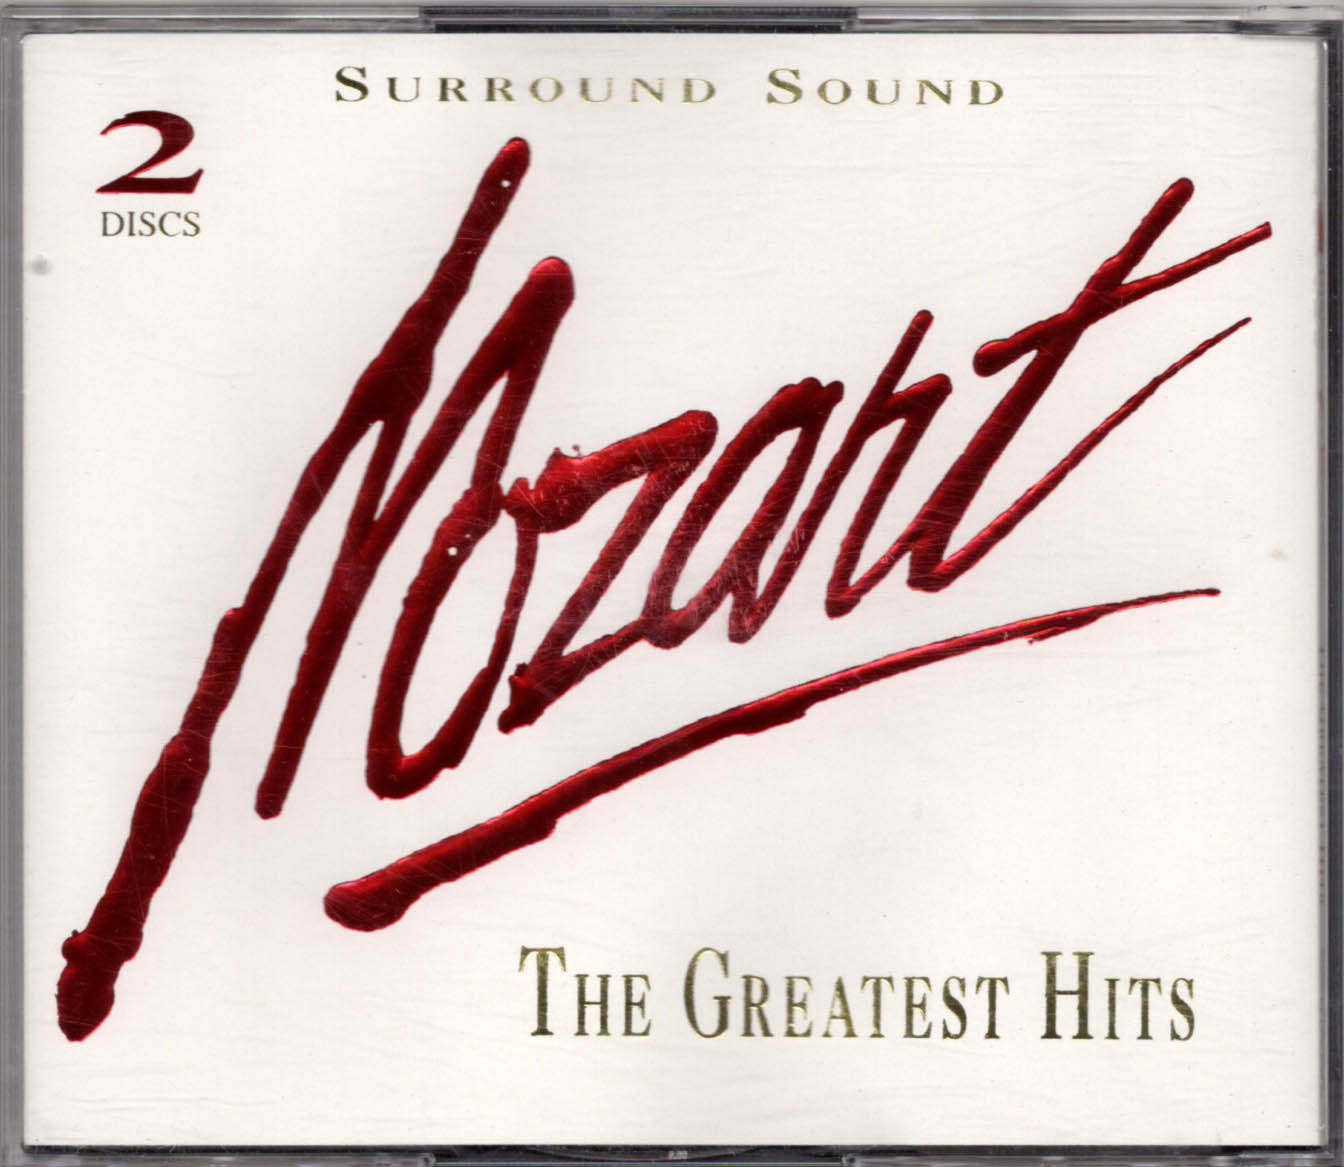 MOZART: THE GREATEST HITS - 1993 Double Disc CD